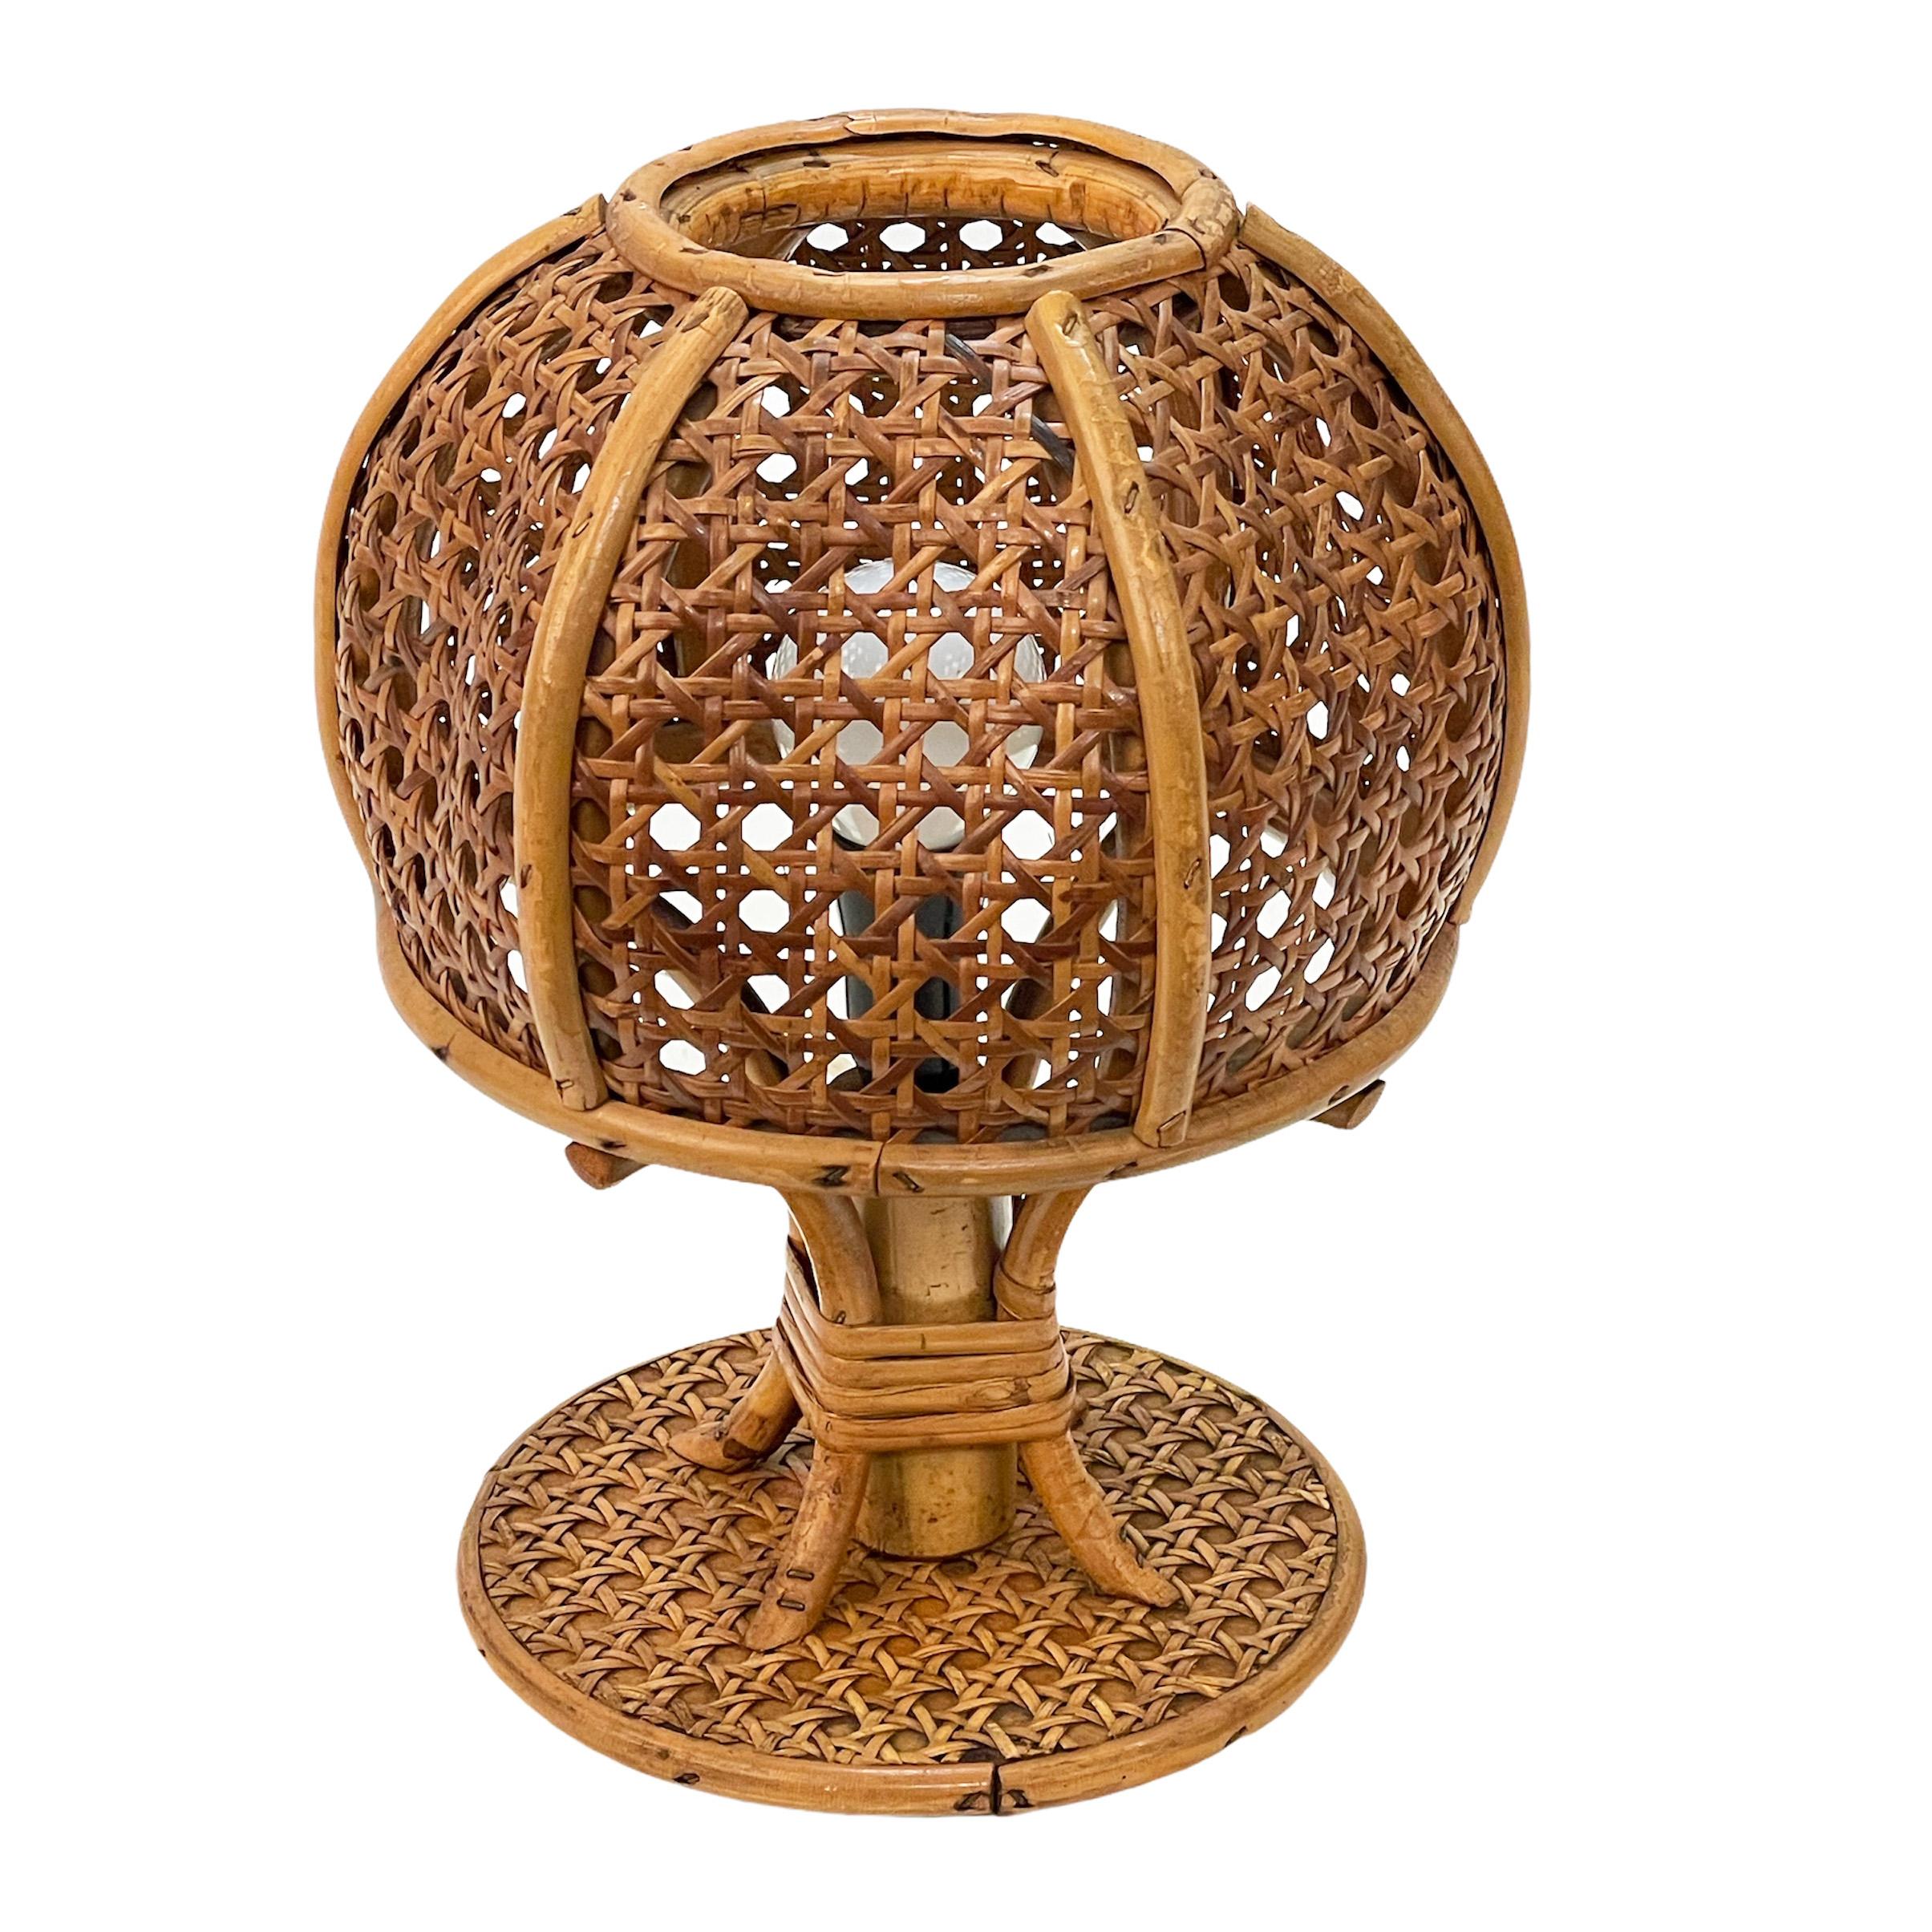 Midcentury Wicker and Rattan Italian Table Lamp, 1960s For Sale 1